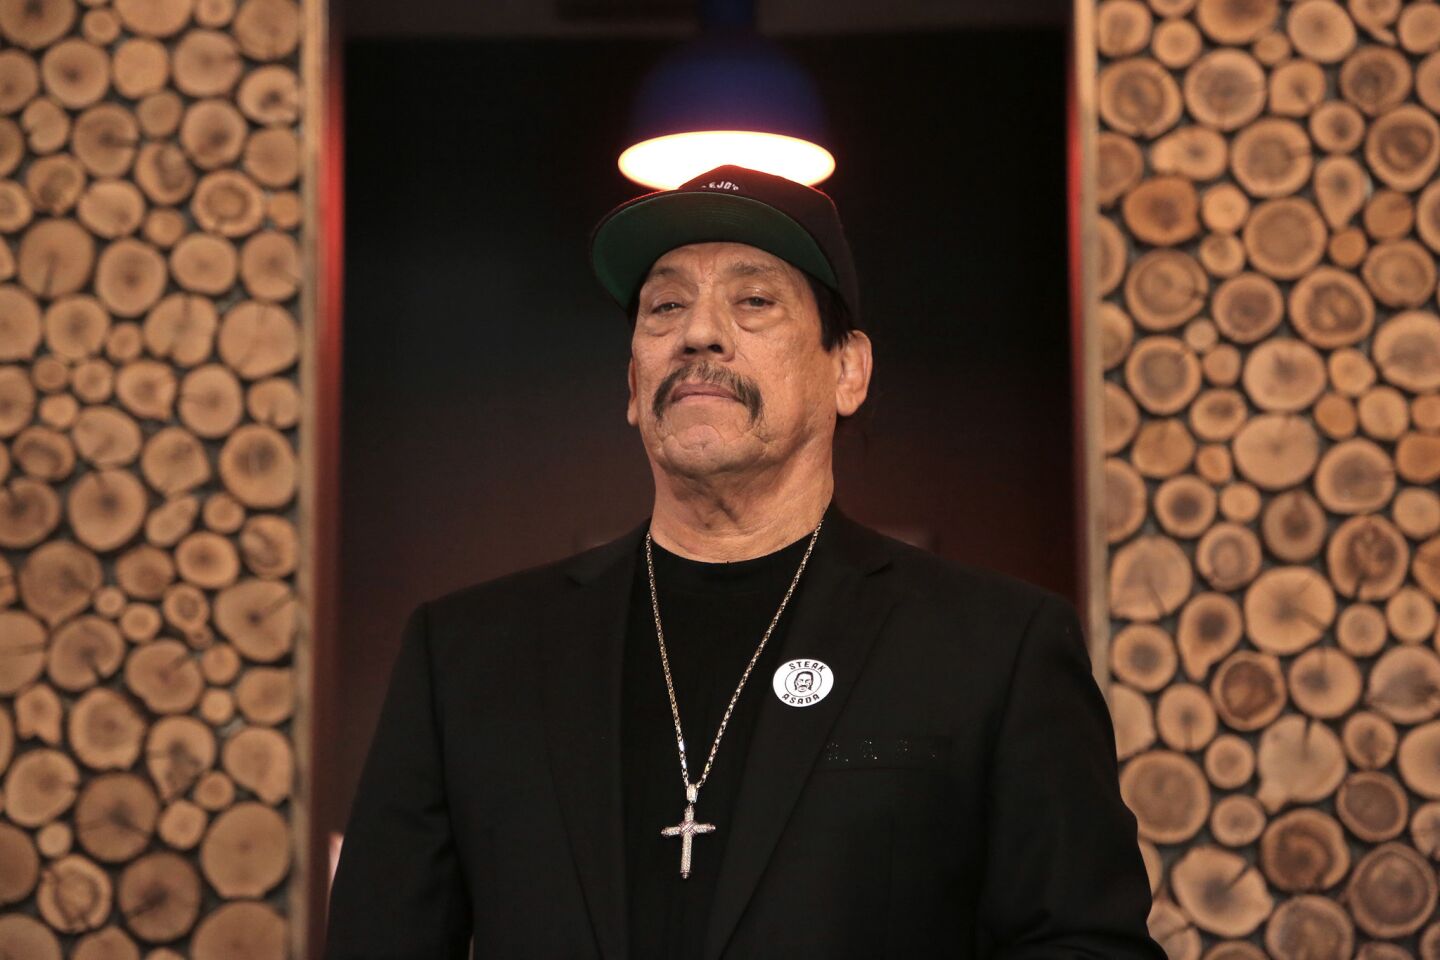 Actor Danny Trejo has opened Trejo's Cantina in Hollywood.